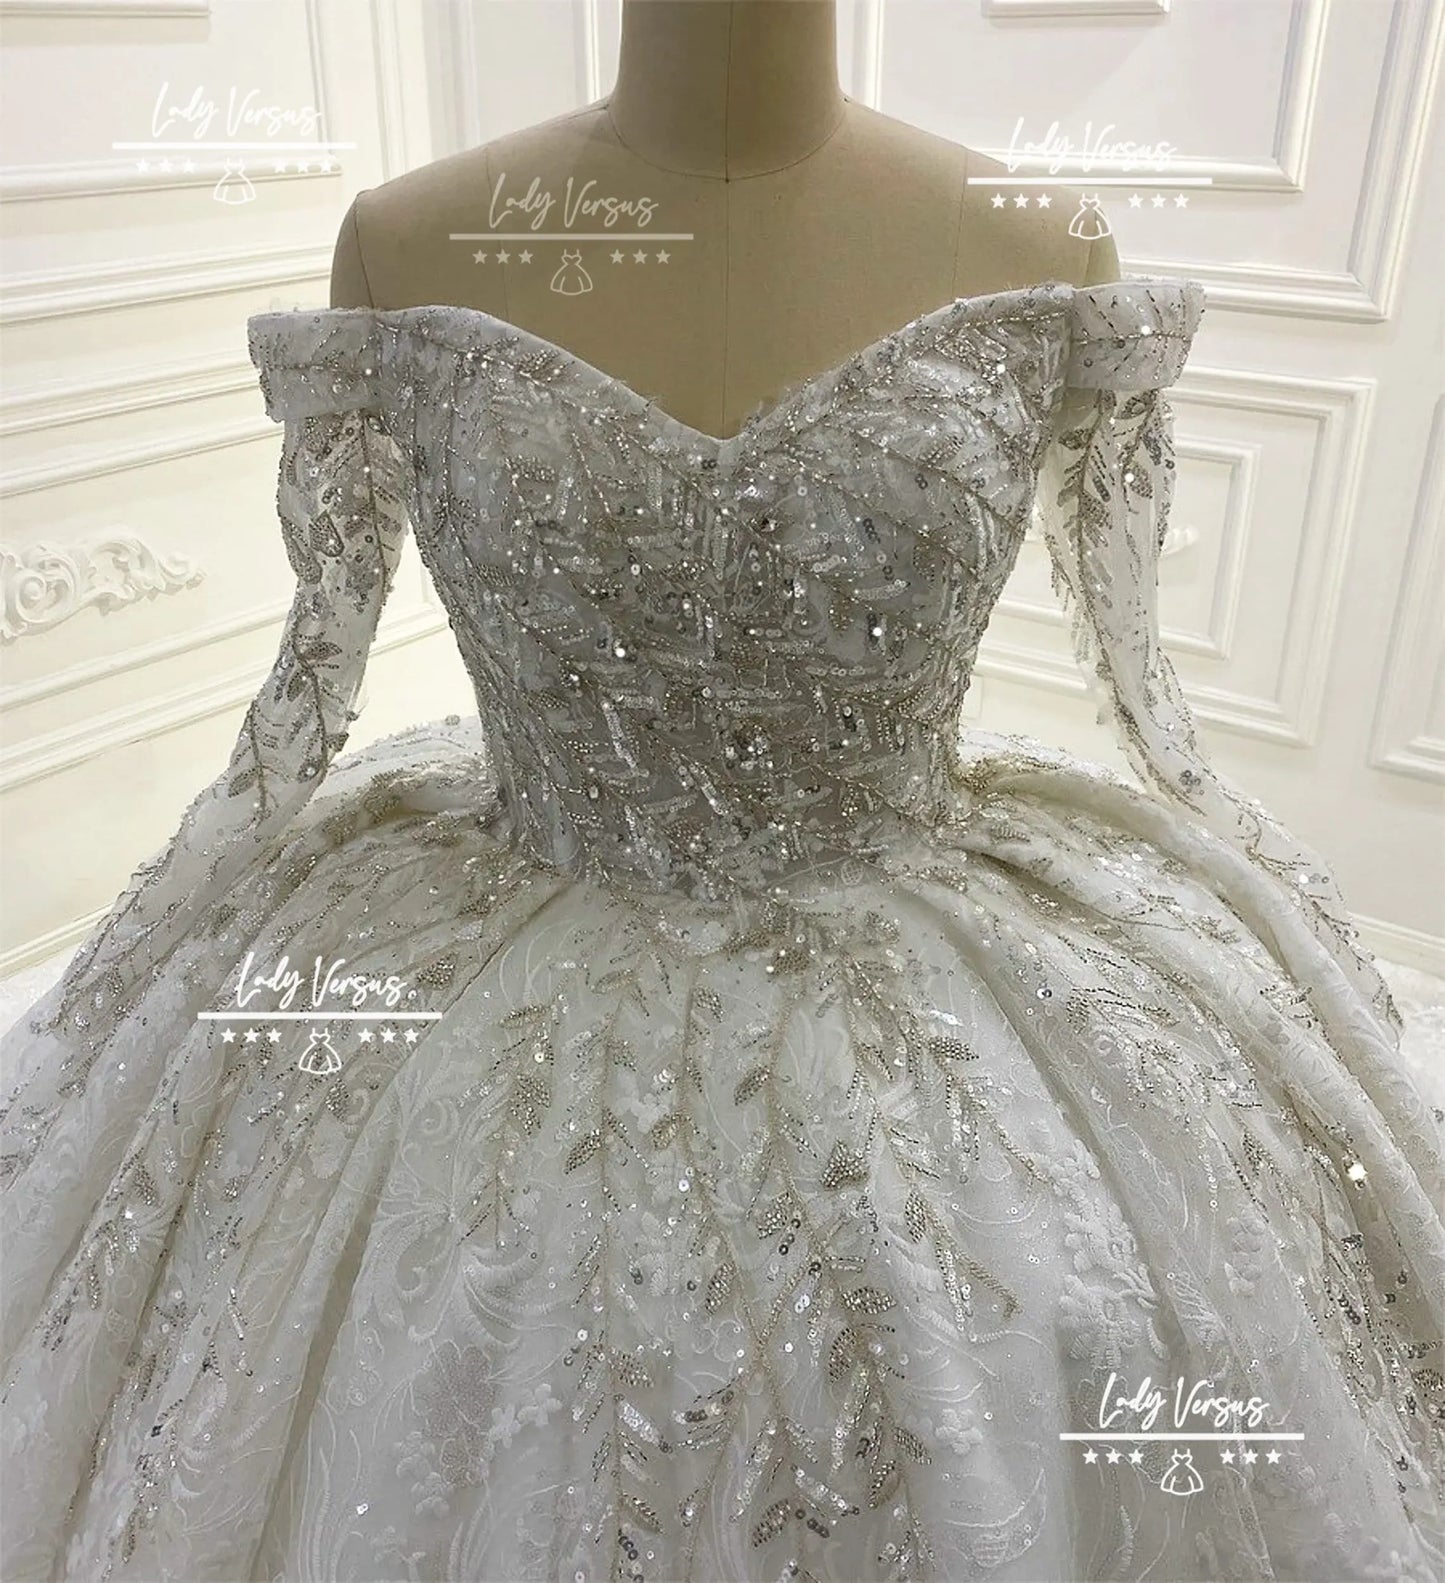 Luxury bridal princess style dress/ Extravagant bridal gown/Gorgeous hand beaded and embellished wedding dress/ Ball Gown/Prom dress Lady Versus